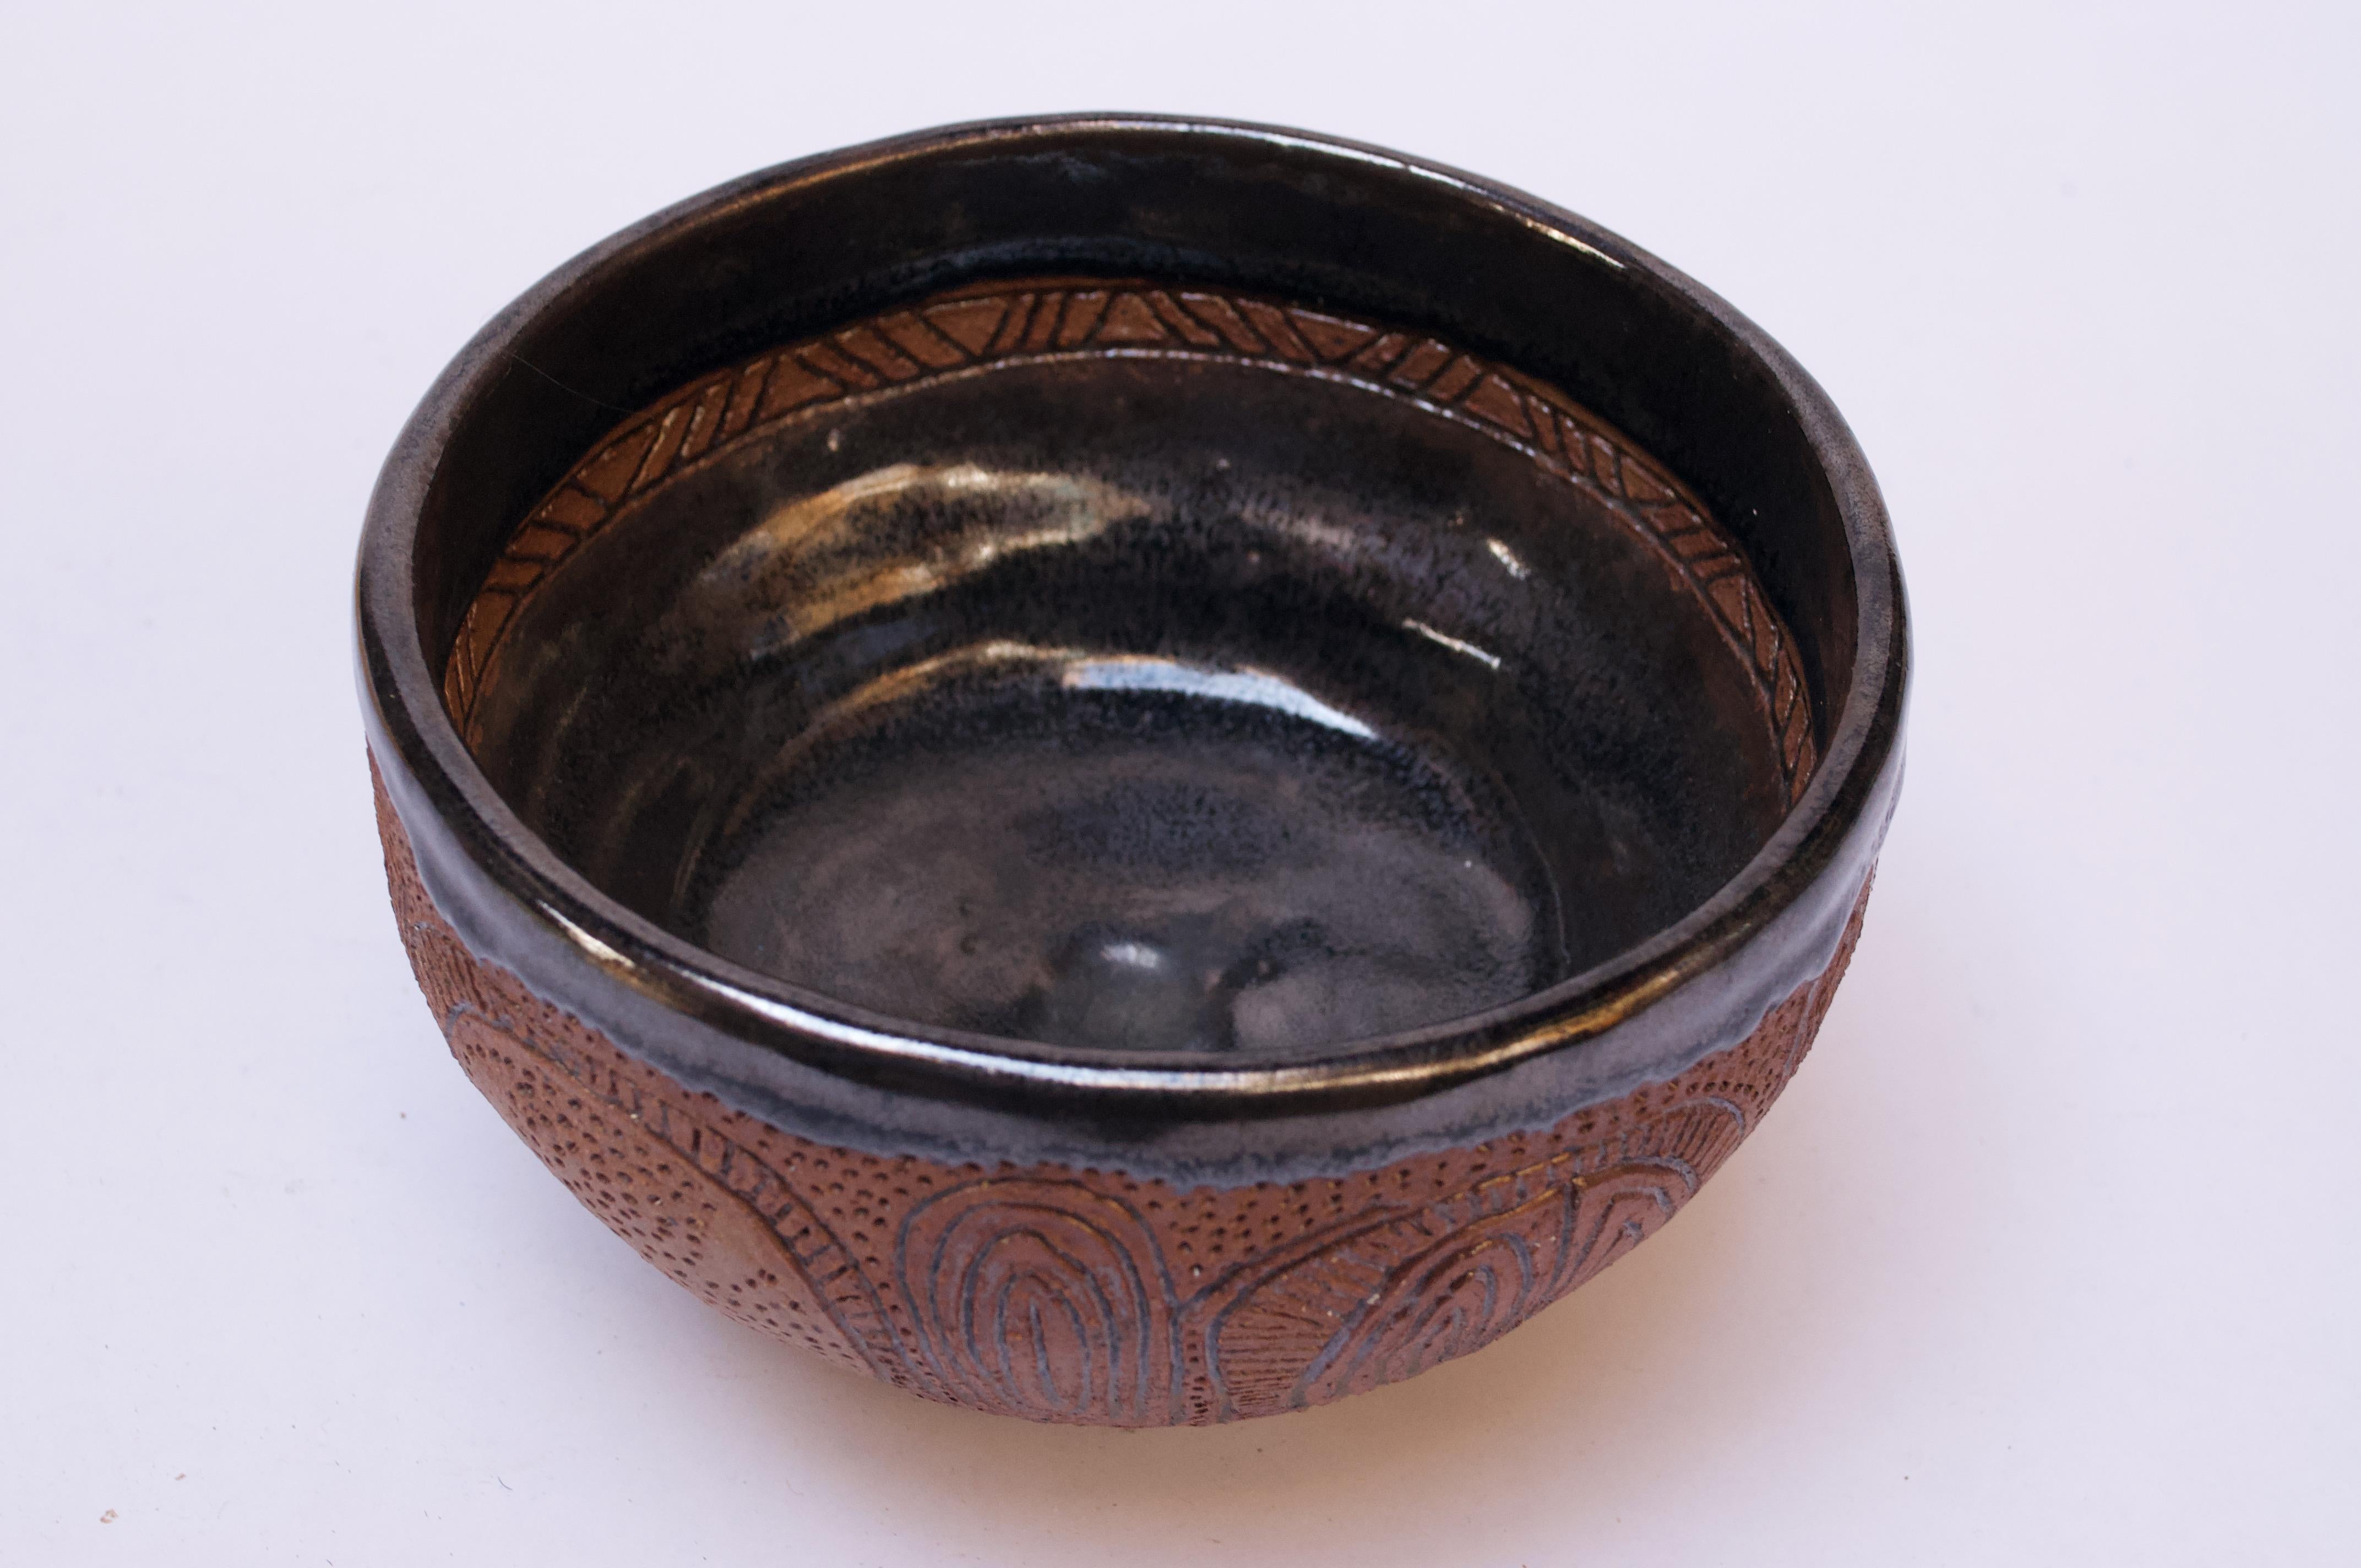 Heavily textured footed bowl with sgraffito and pinhole decoration throughout. Black interior glaze has a subtle metallic sheen and features a thin circular band with incised triangular and linear detail. 
Signed 